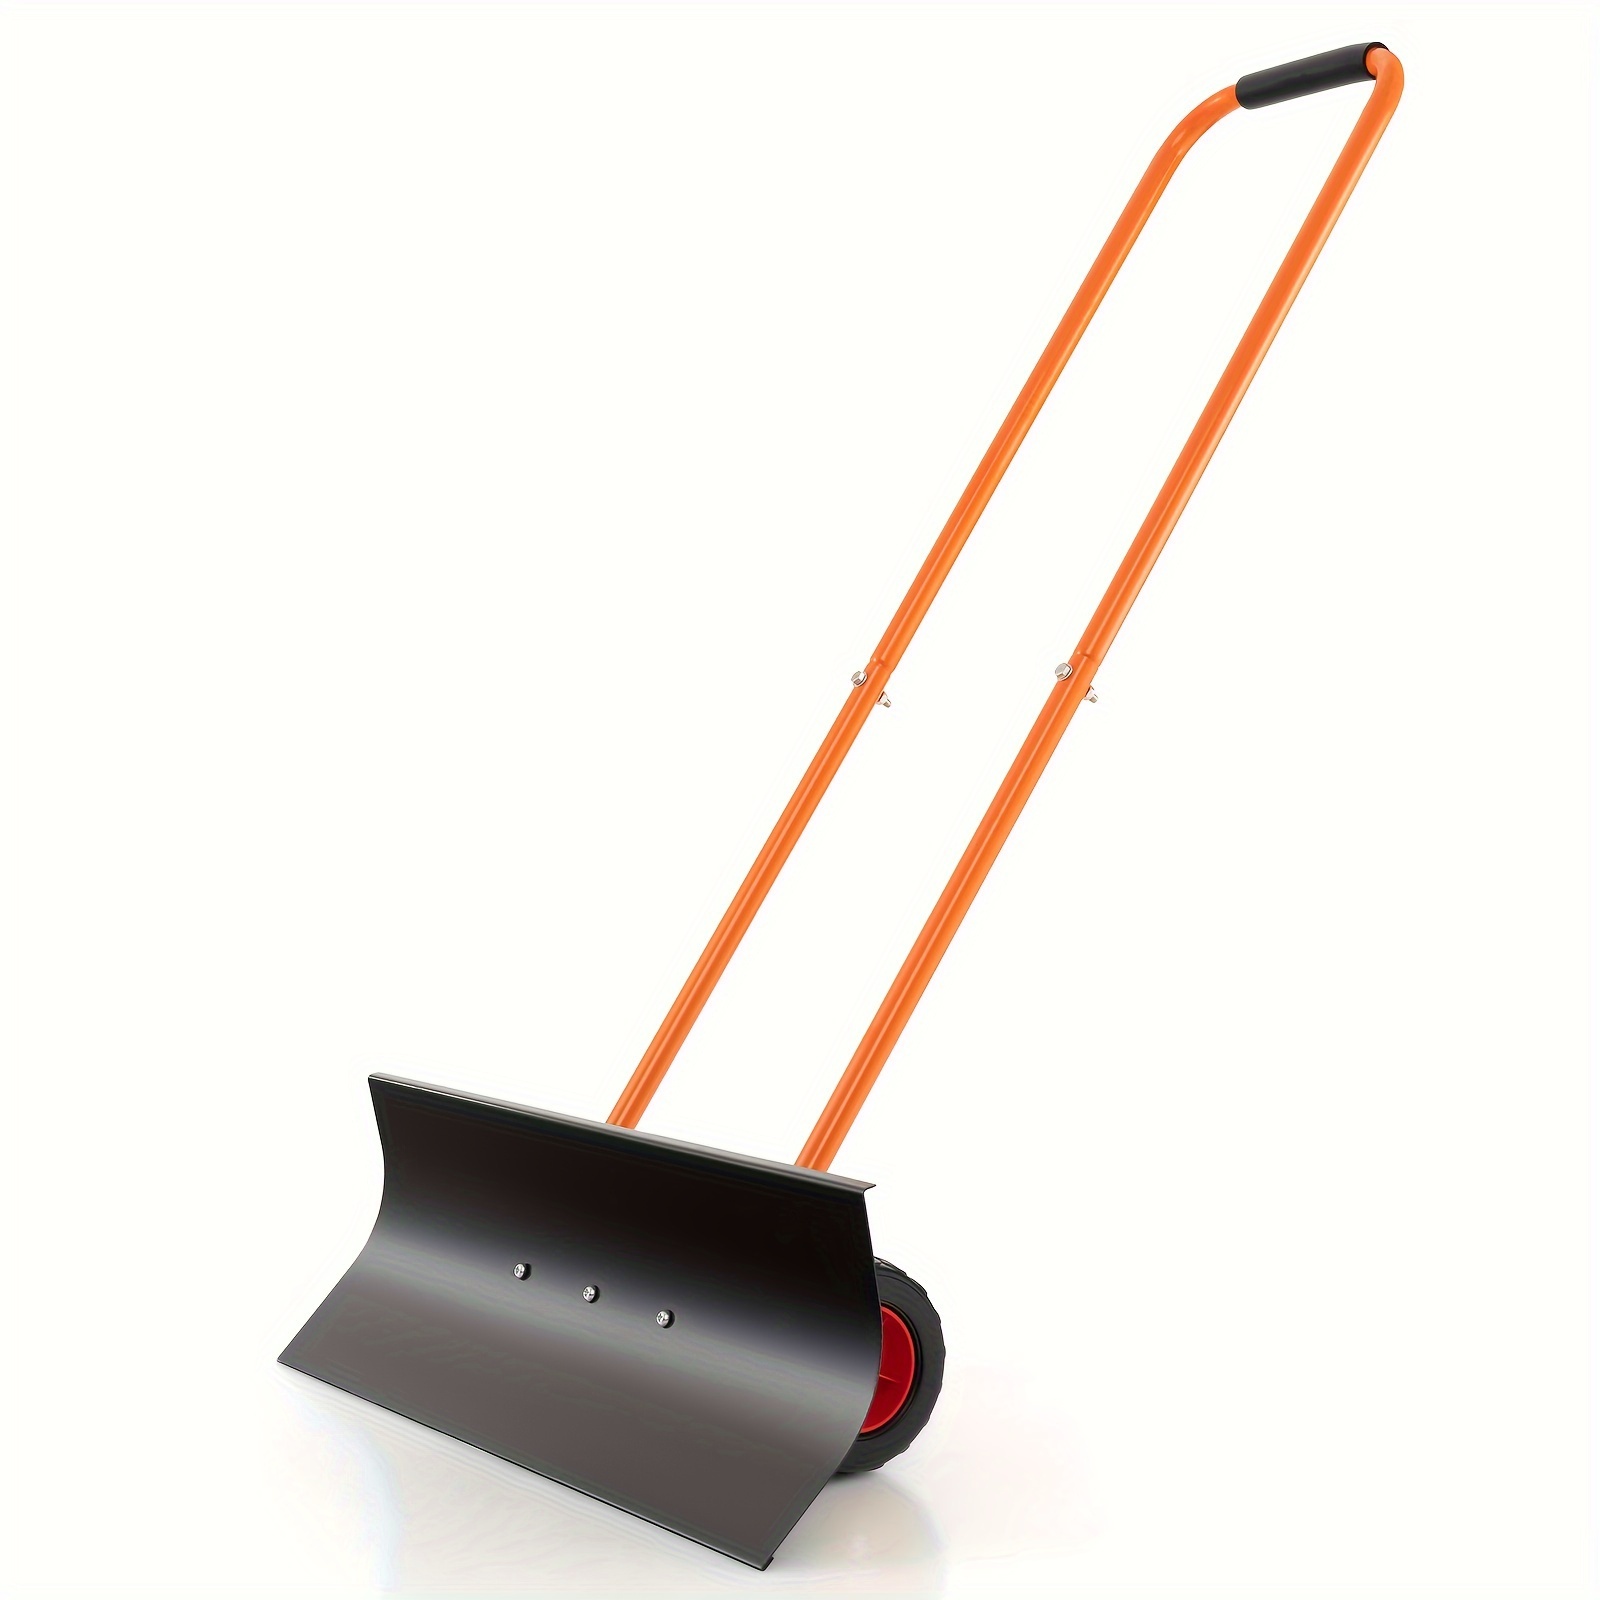 

1pc Adjustable Wheeled Snow Shovel, Heavy-duty Metal Snow Pusher With Ergonomic Curve, Large Snow Removal Tool With 10" Wheels For Driveway And Pavement Clearing